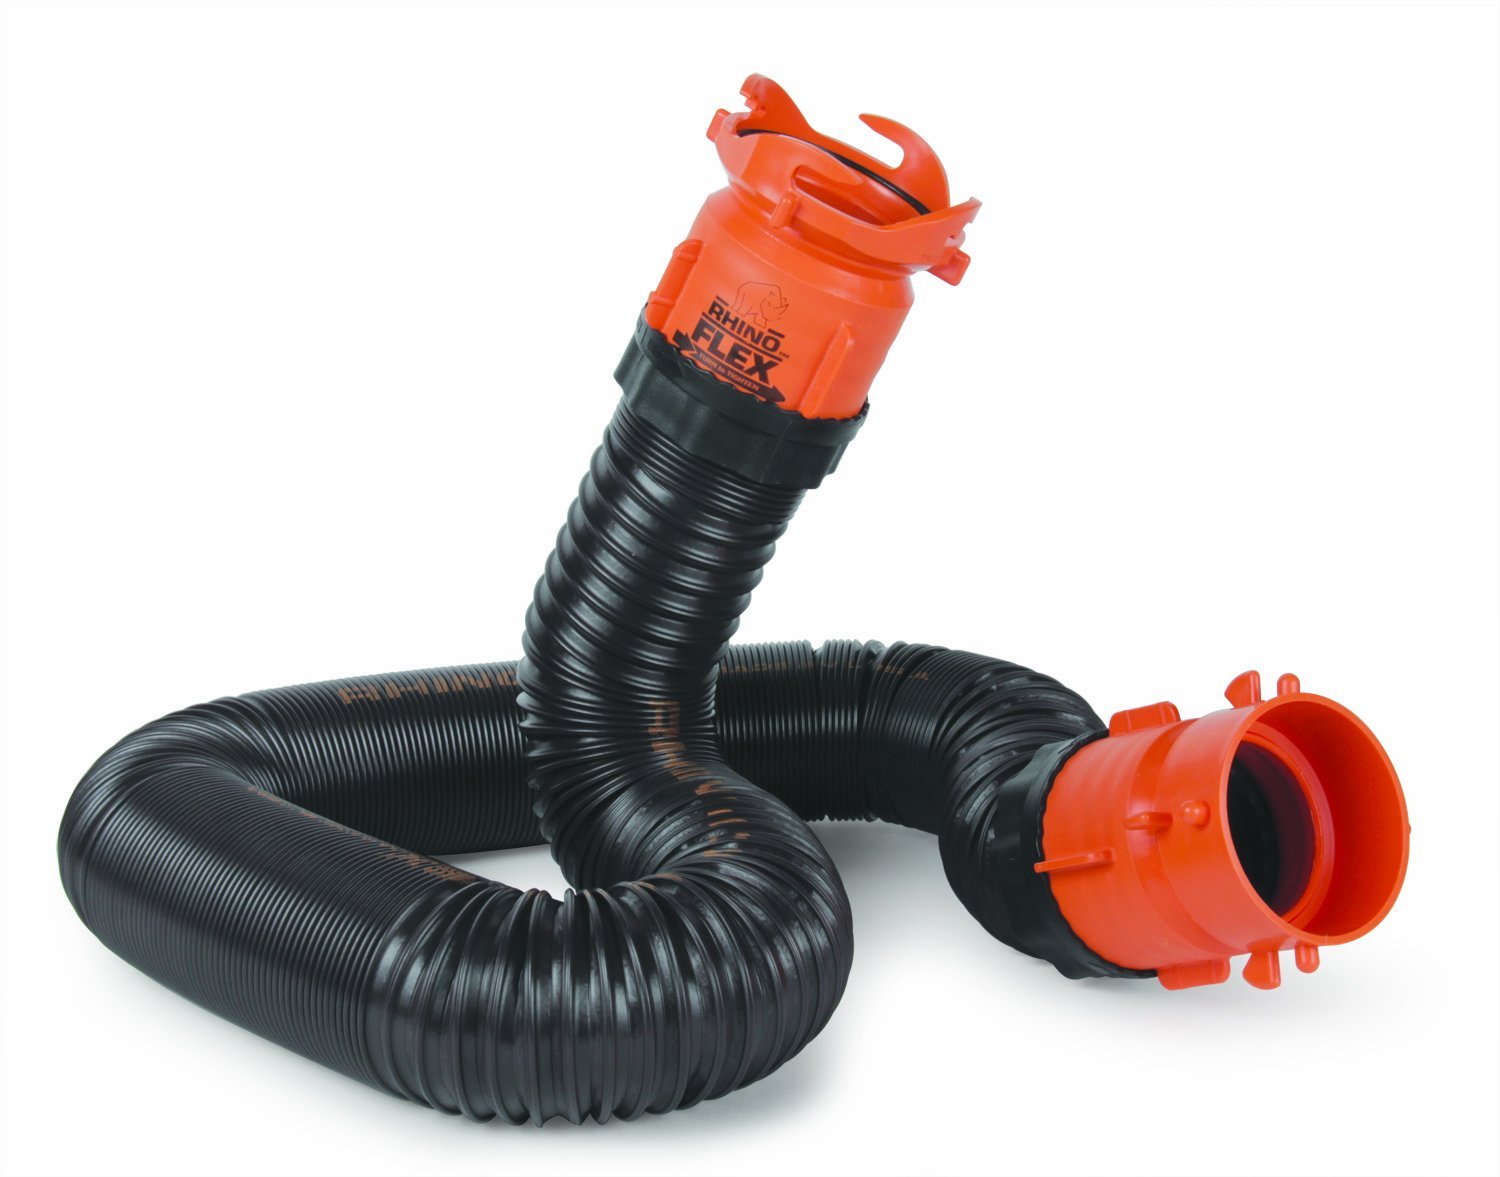  Camco 39764 RhinoFLEX 10' RV Sewer Hose Extension Kit with Swivel Fitting 